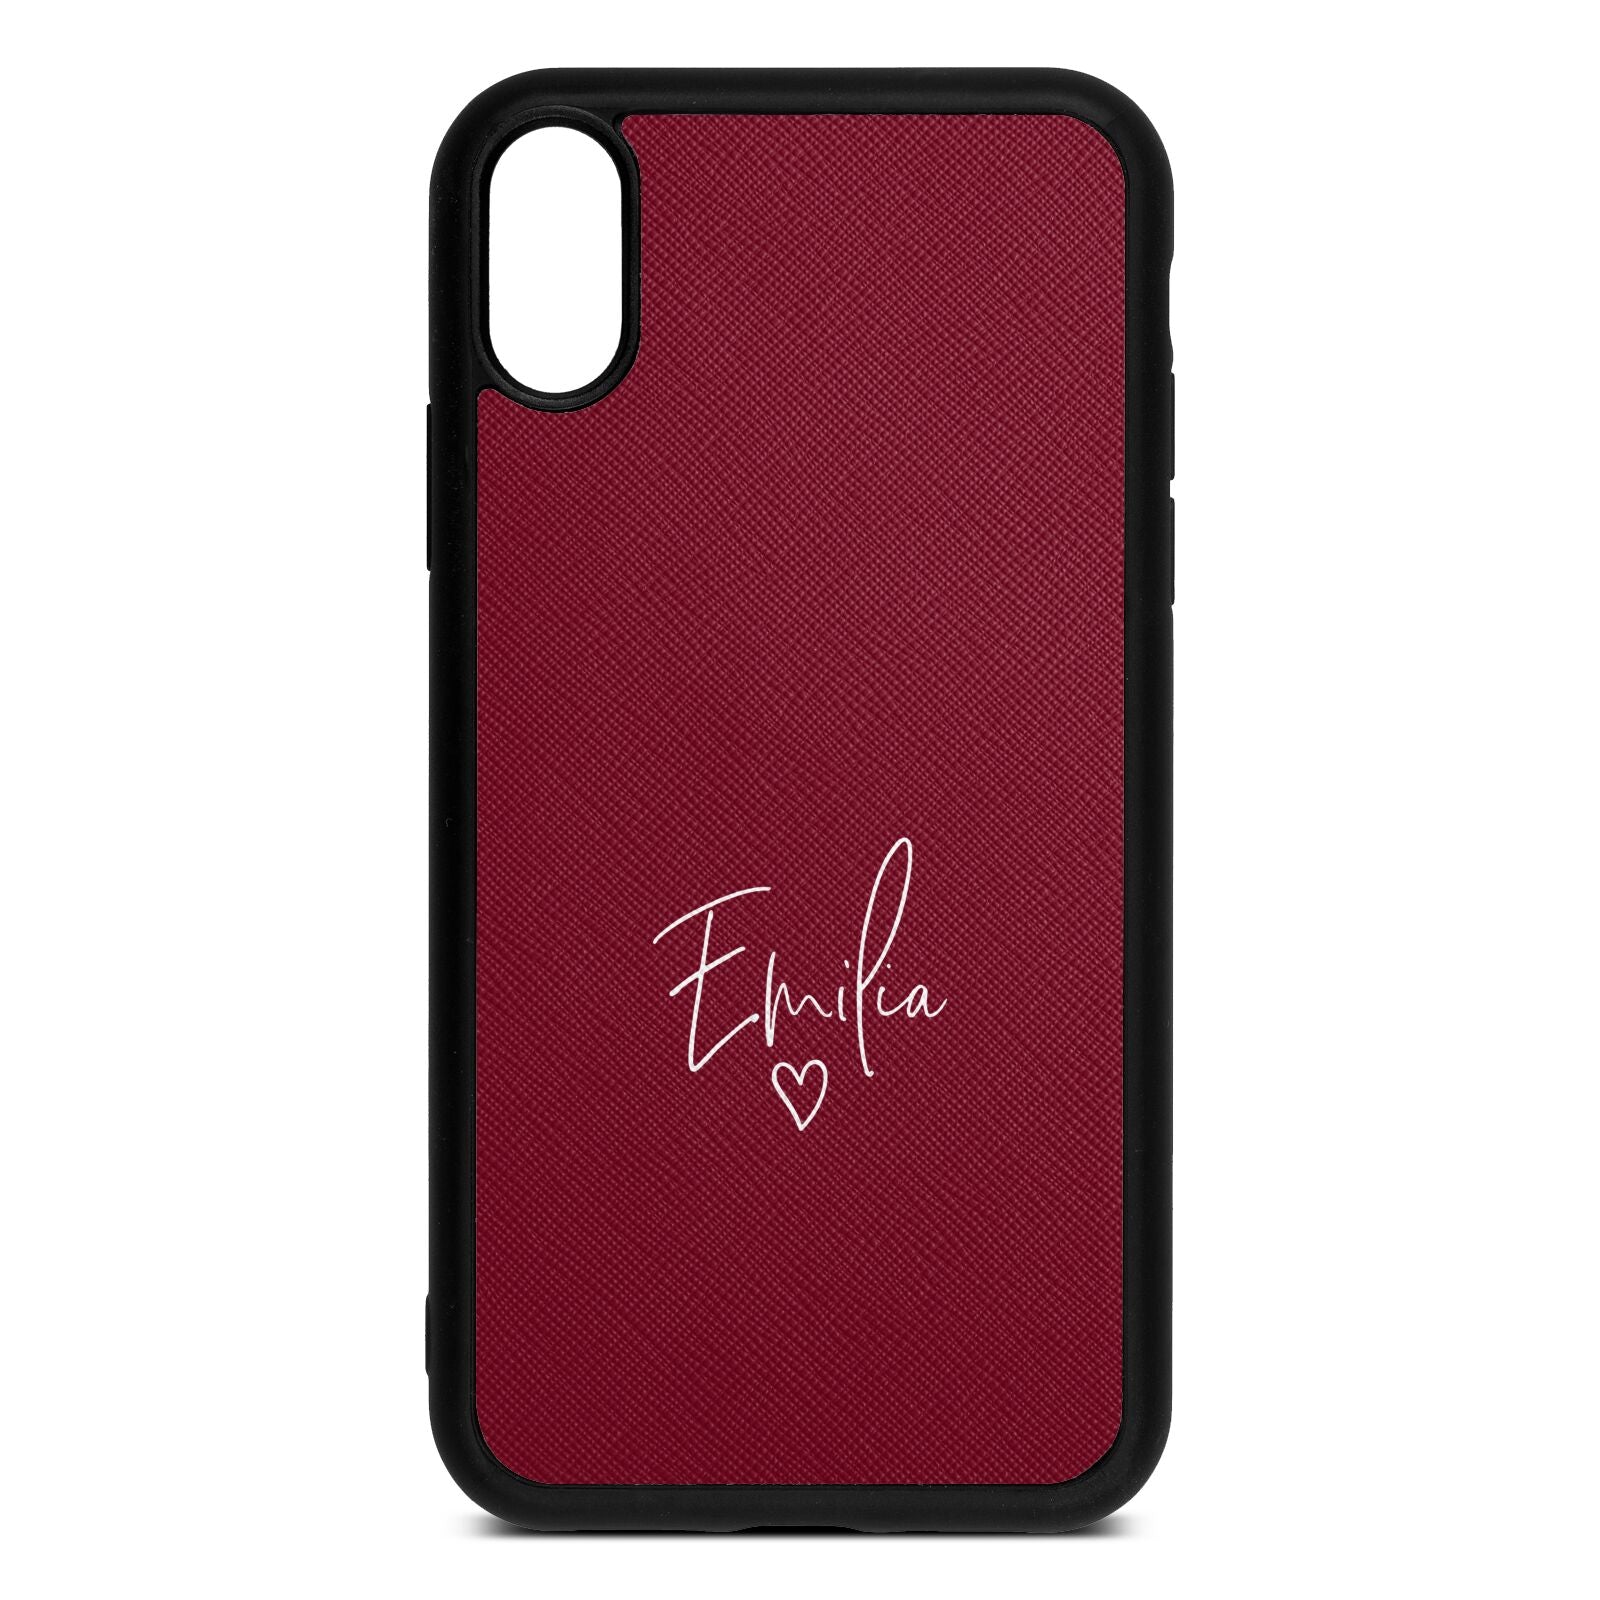 White Handwritten Name Transparent Wine Red Saffiano Leather iPhone Xr Case